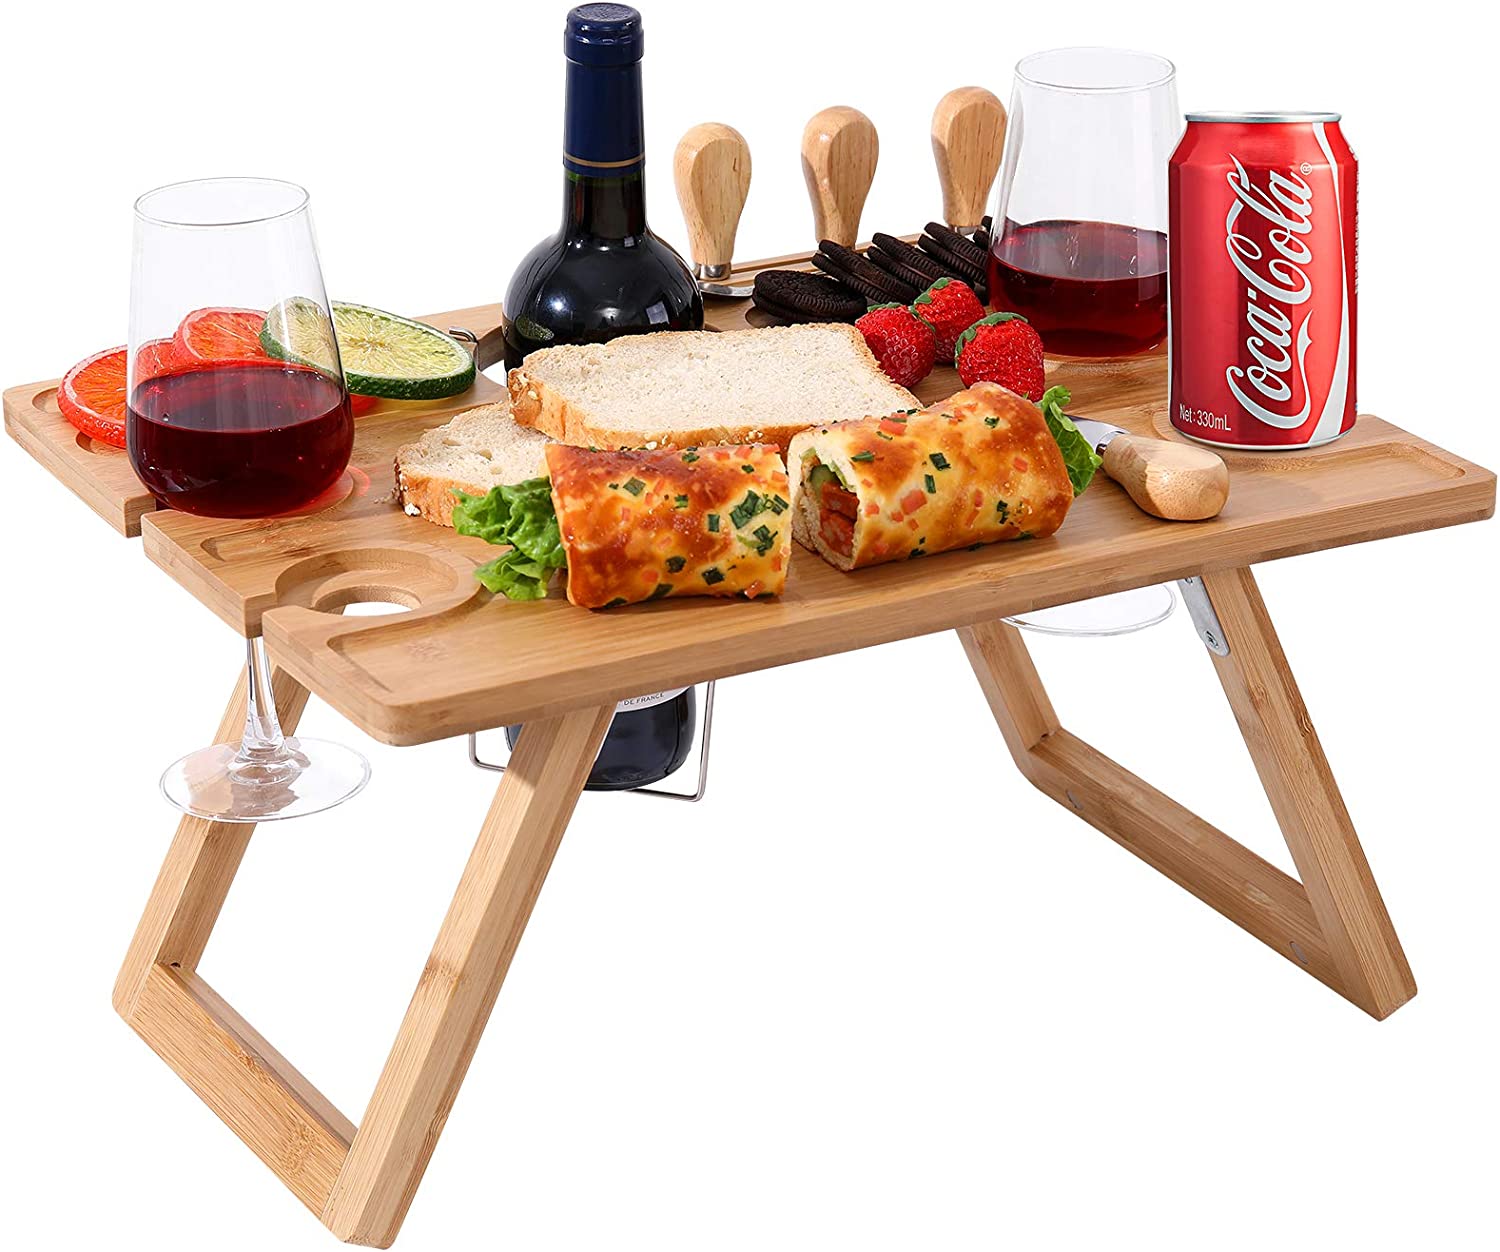 Portable Outdoor Bamboo Picnic Dining Table (Includes 4 Cheese Knives)